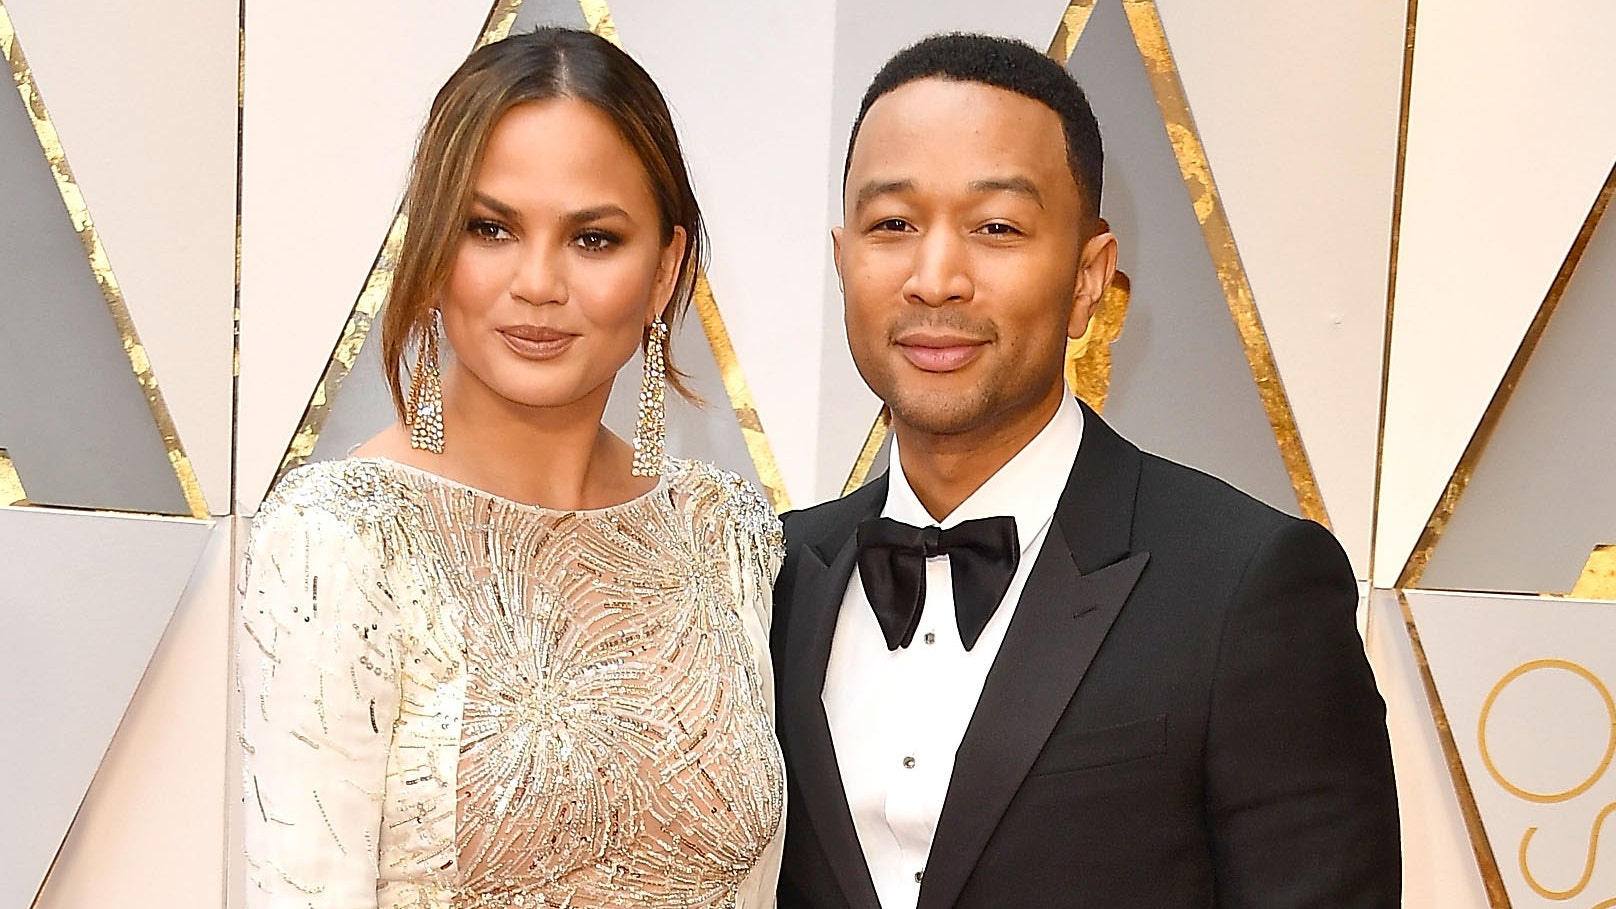 Chrissy Teigen says the 'strangest place' where she and John Legend got intimate together was the DNC